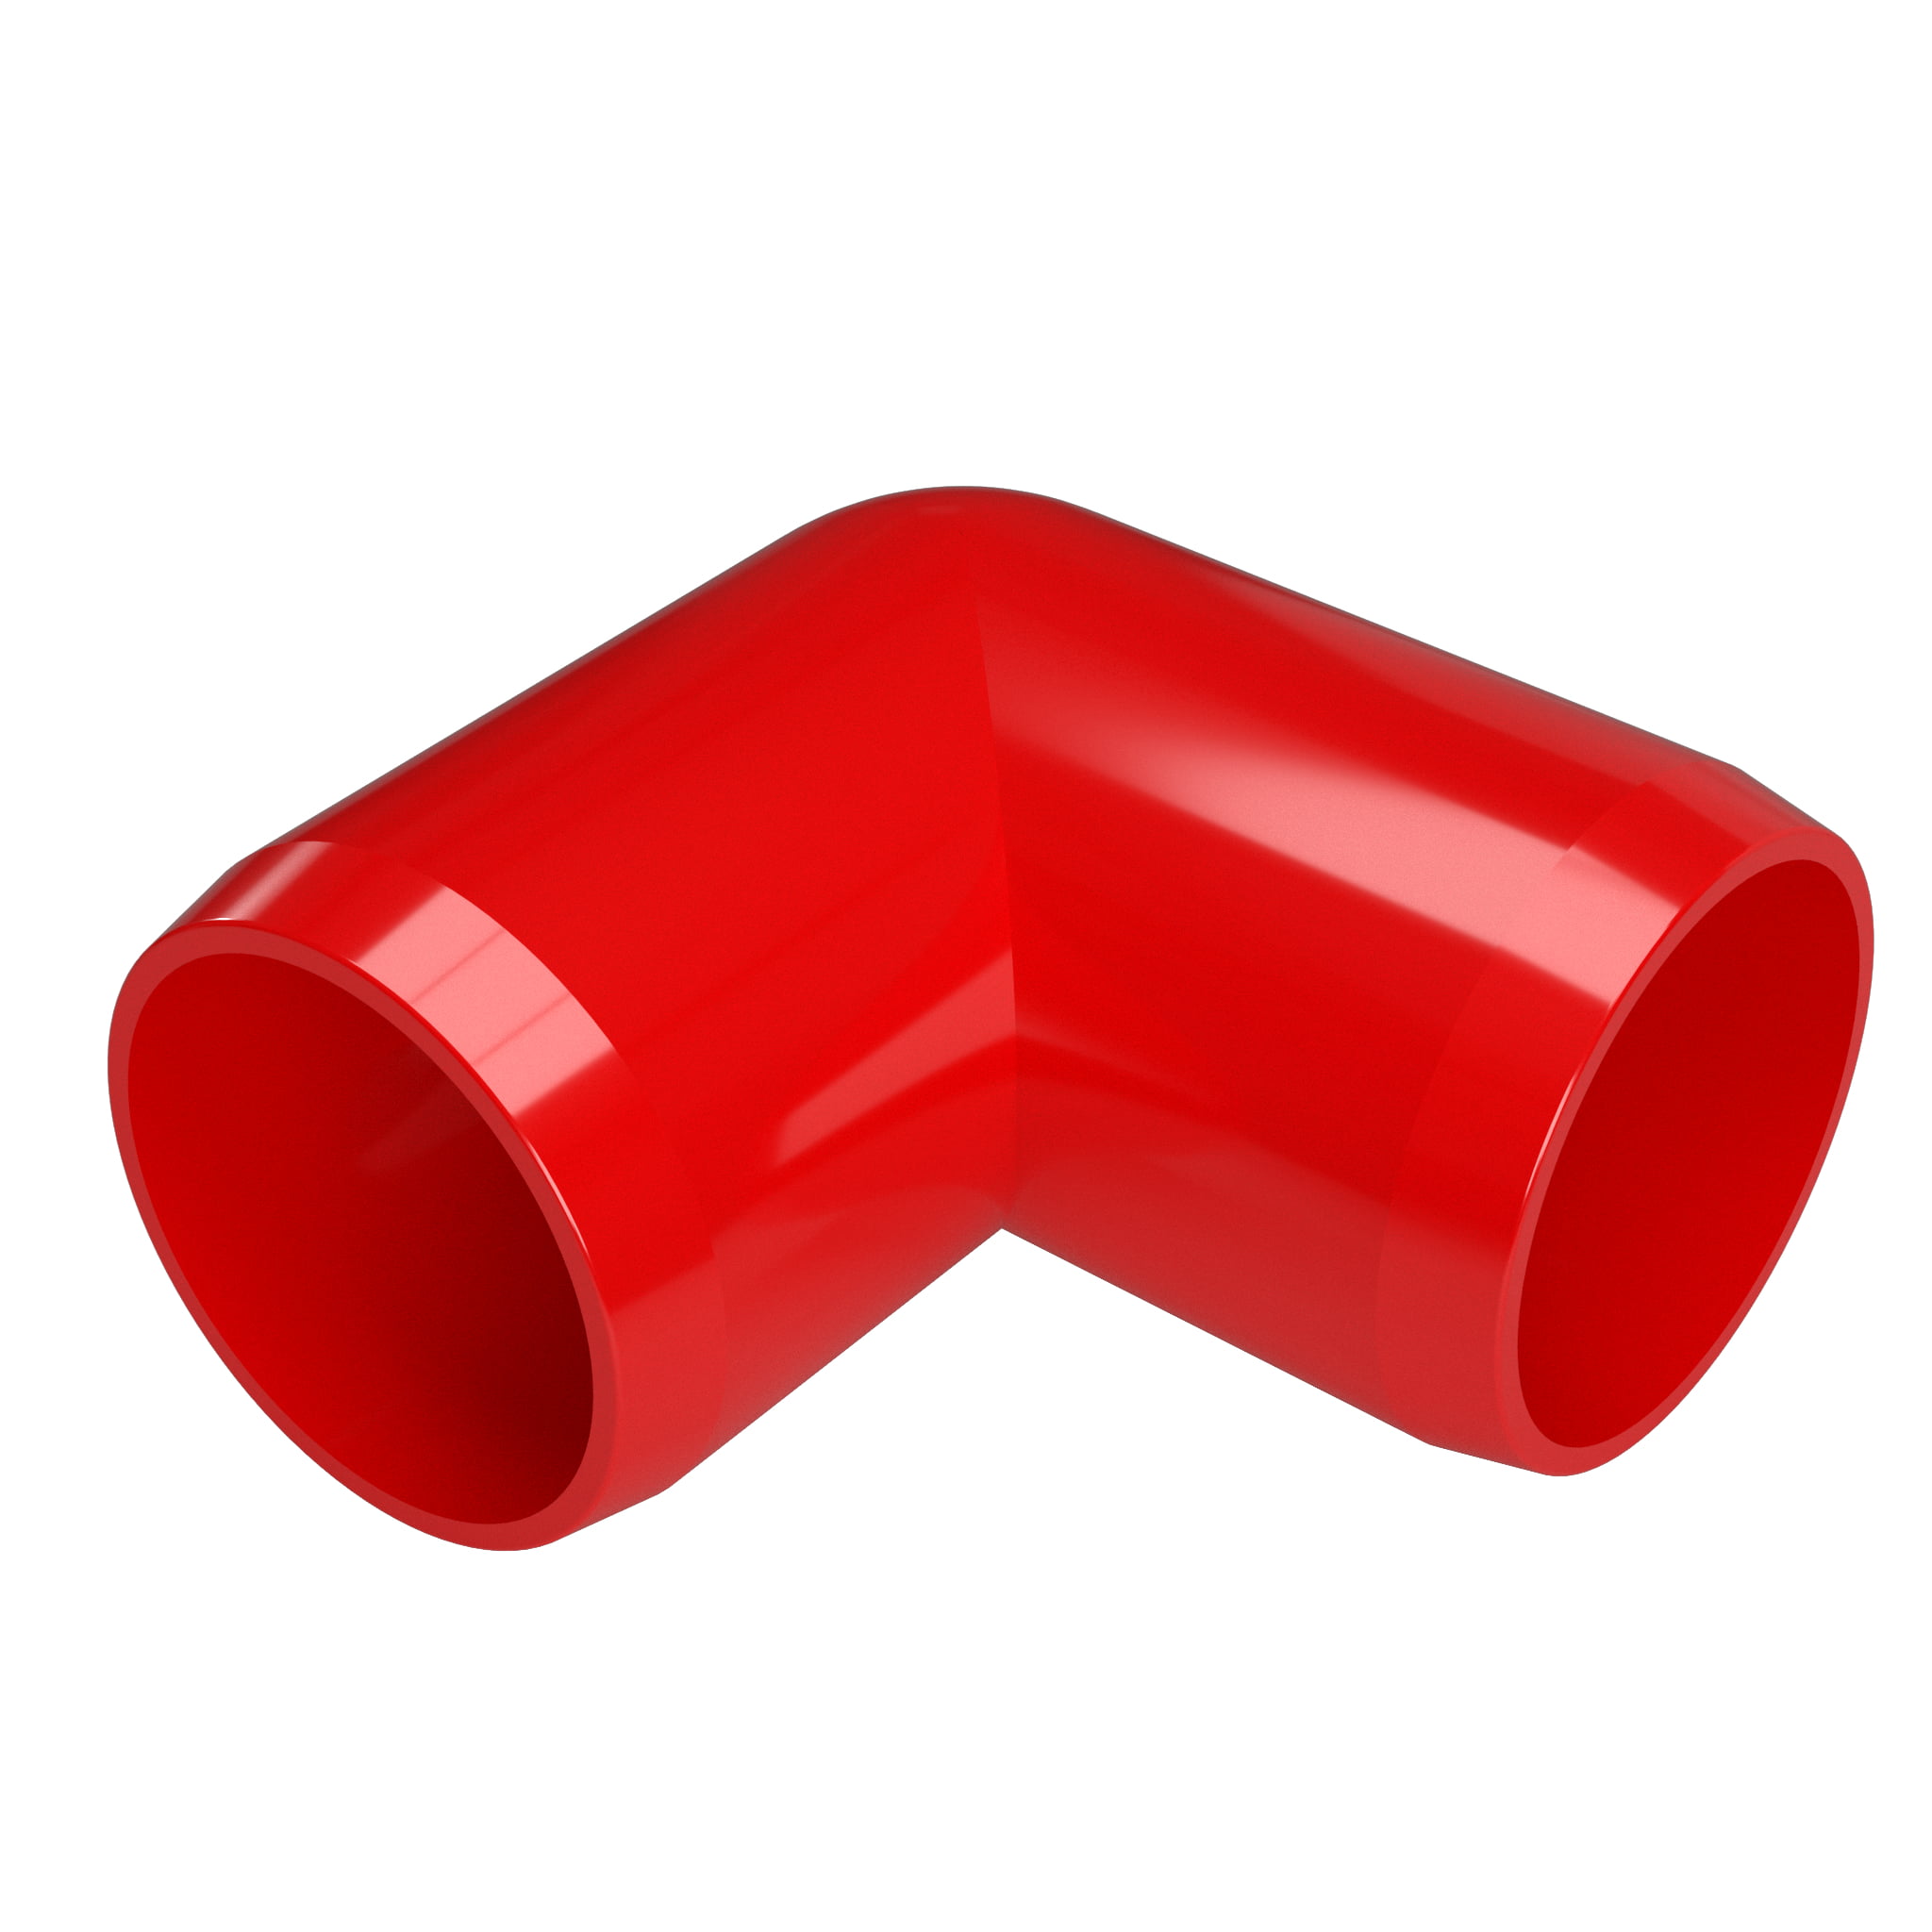 FORMUFIT F114STE-RD-4 Slip Tee PVC Fitting 1-1/4 Size Furniture Grade Red 1-1/4 Size Pack of 4 